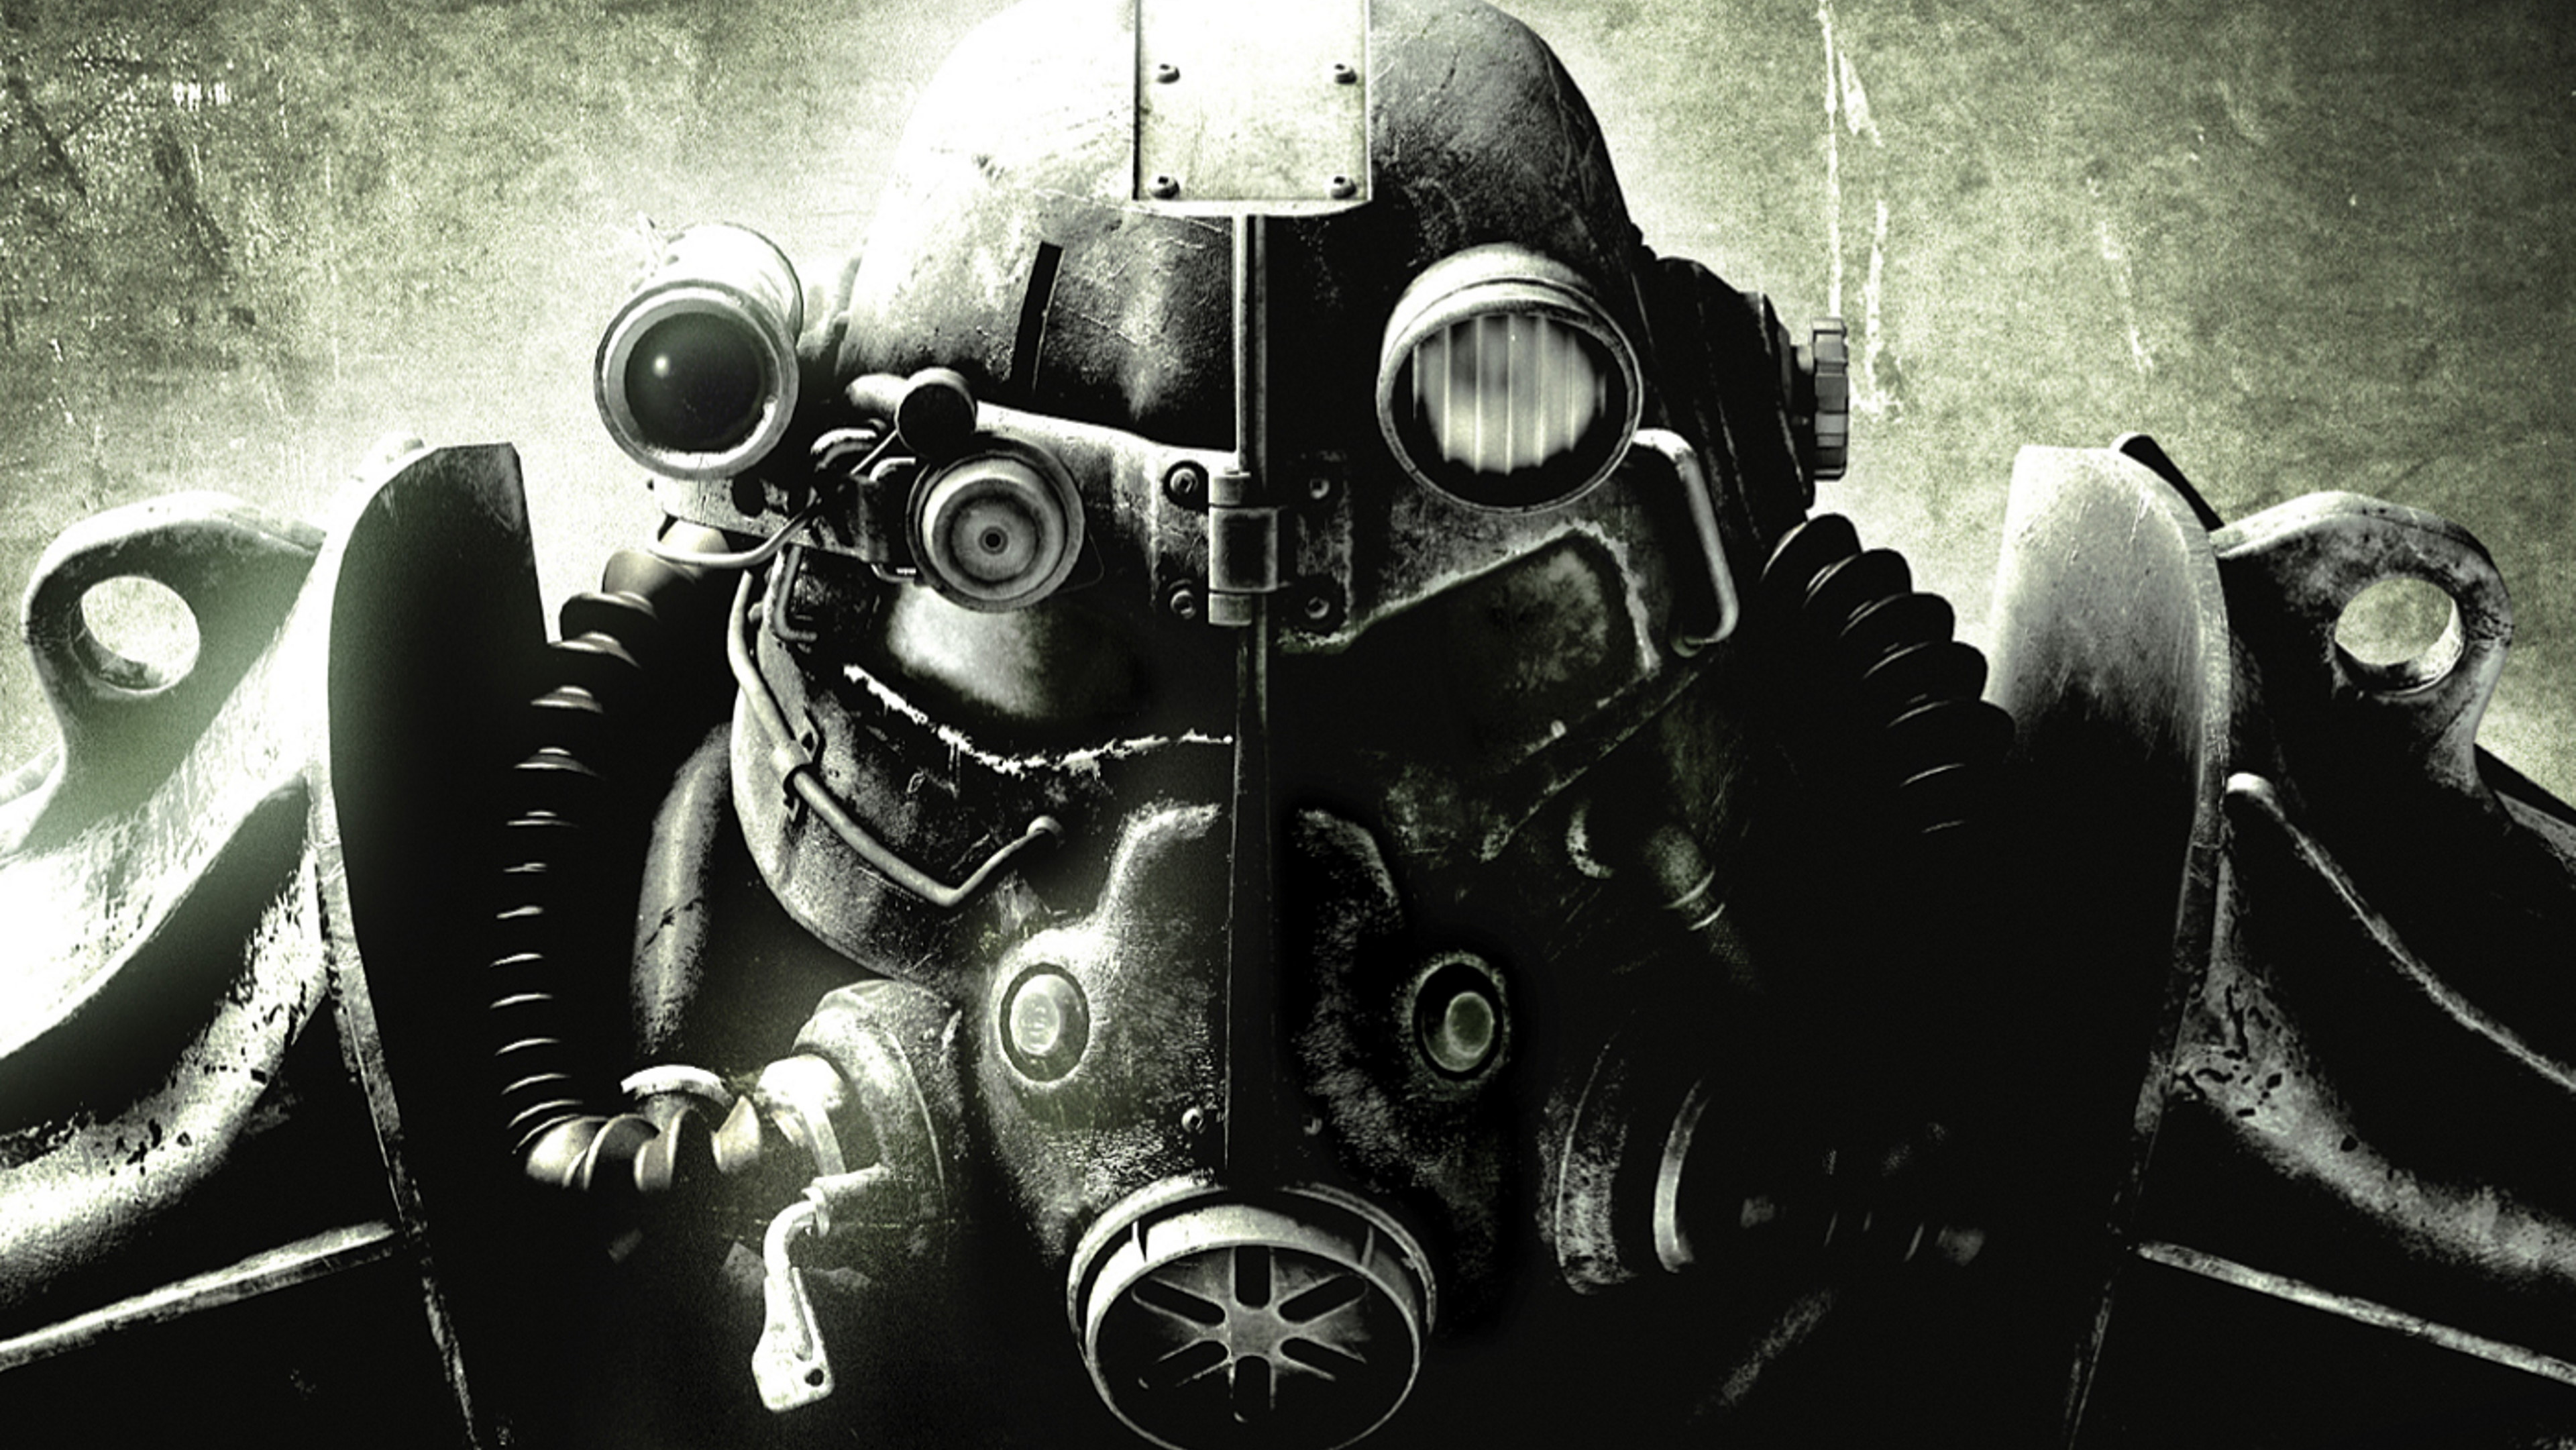 Fallout 3 and Evoland Legendary Edition are next week's free Epic